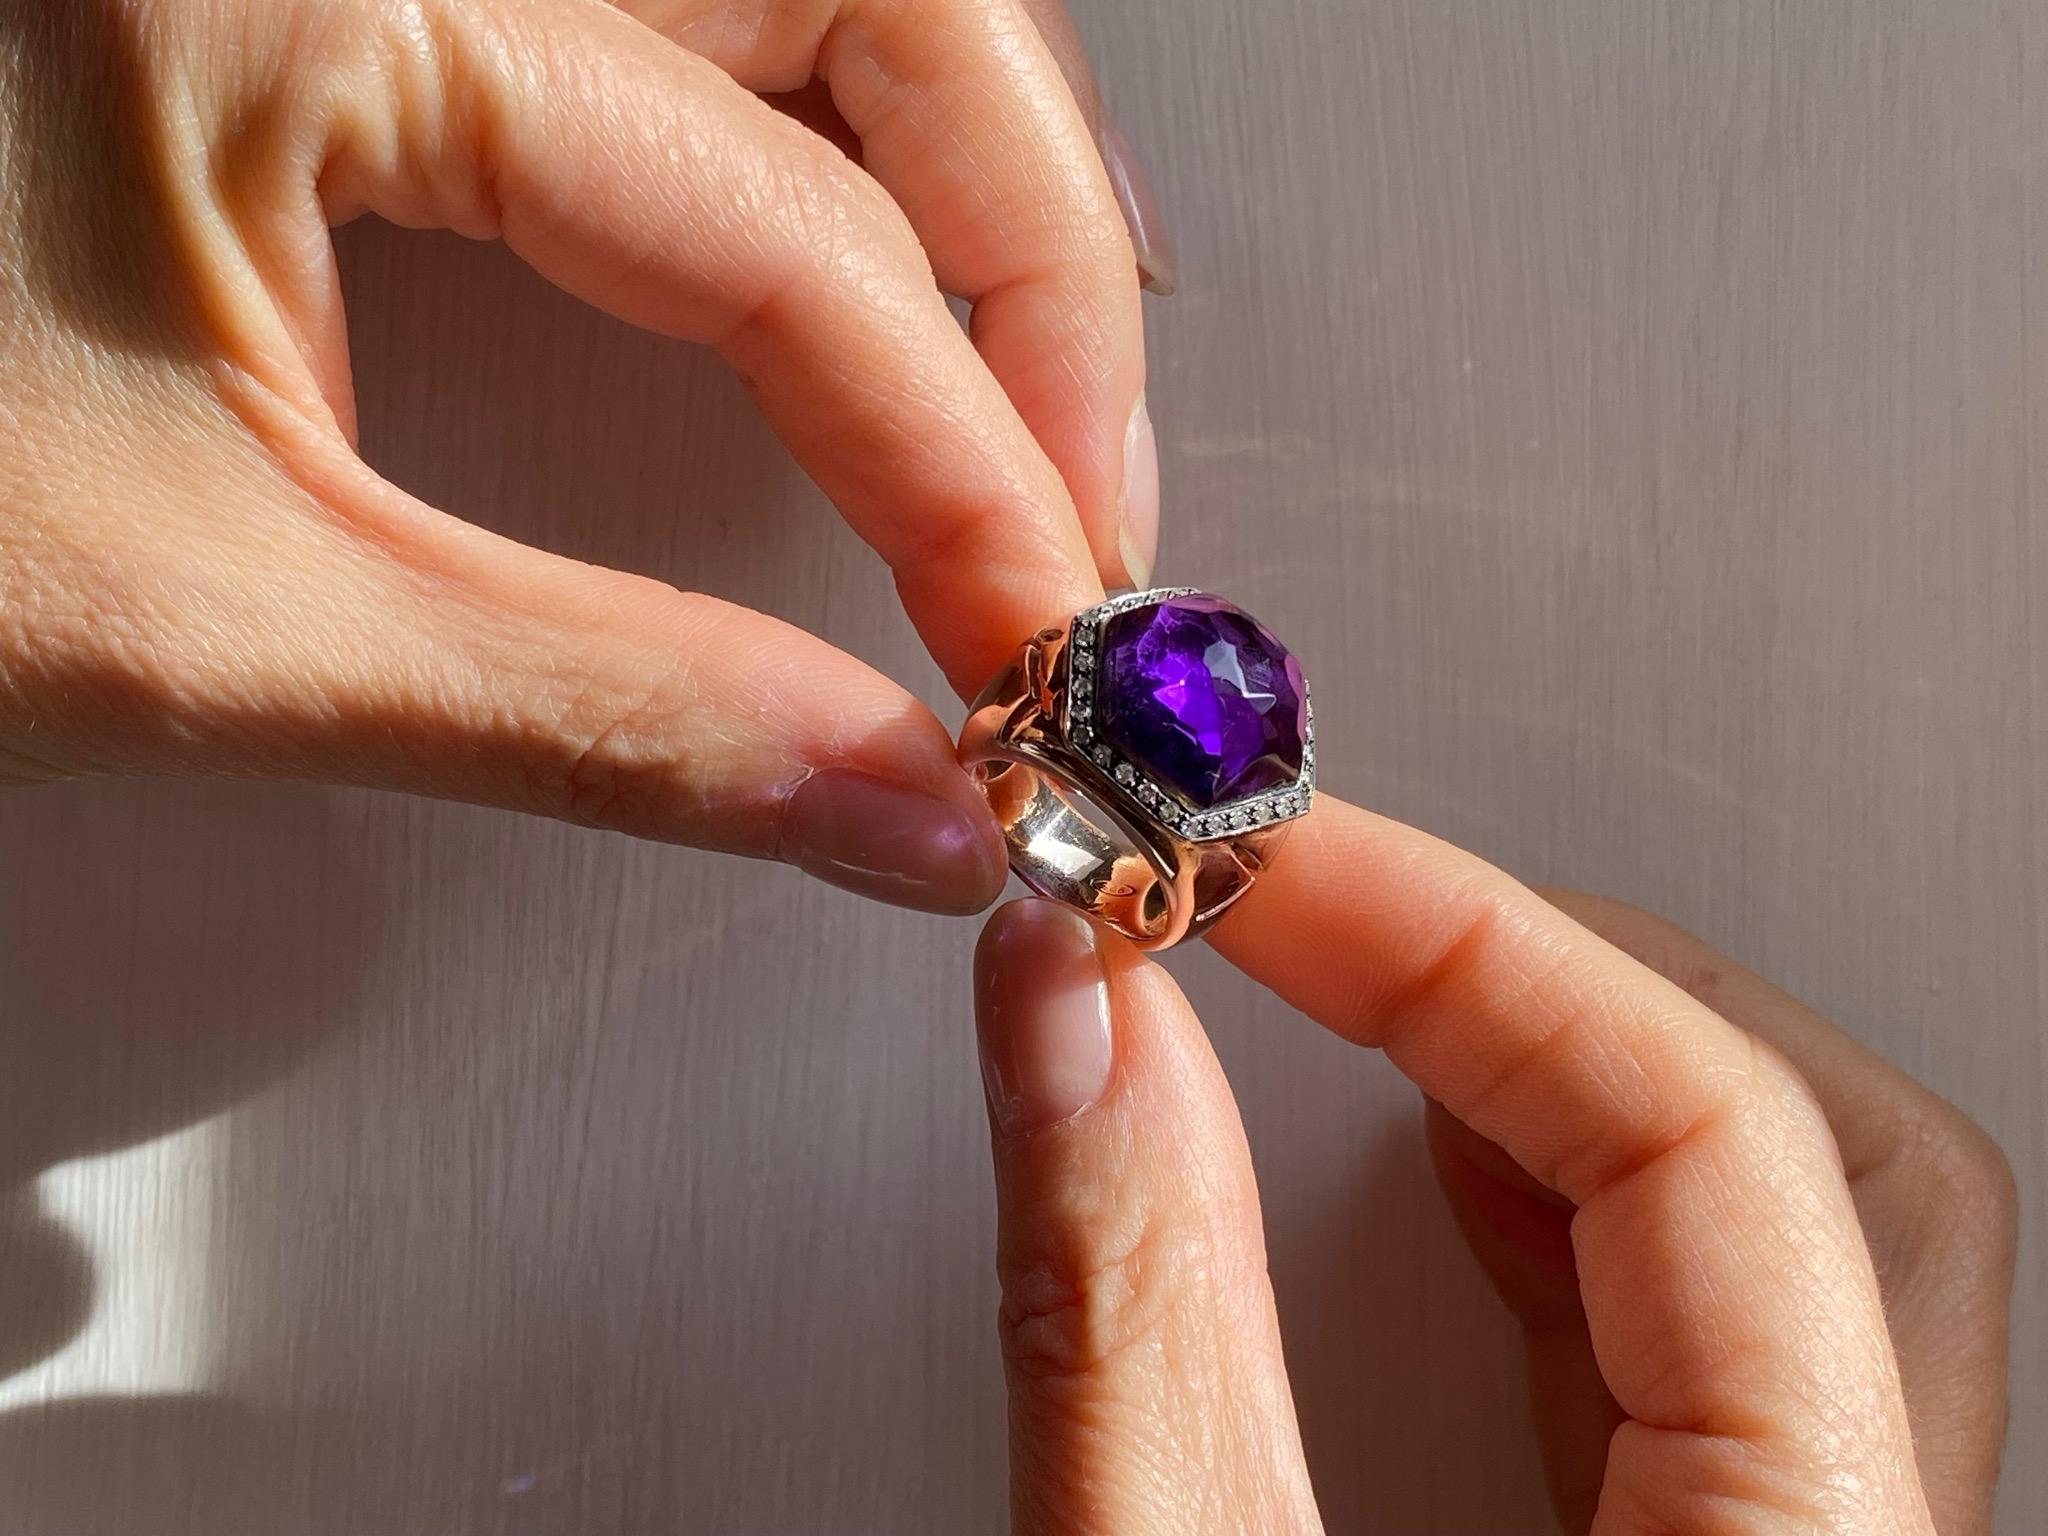 Brilliant Cut Rossella Ugolini Hexagonal Amethyst Cocktail Ring 18K Gold and Diamonds For Sale